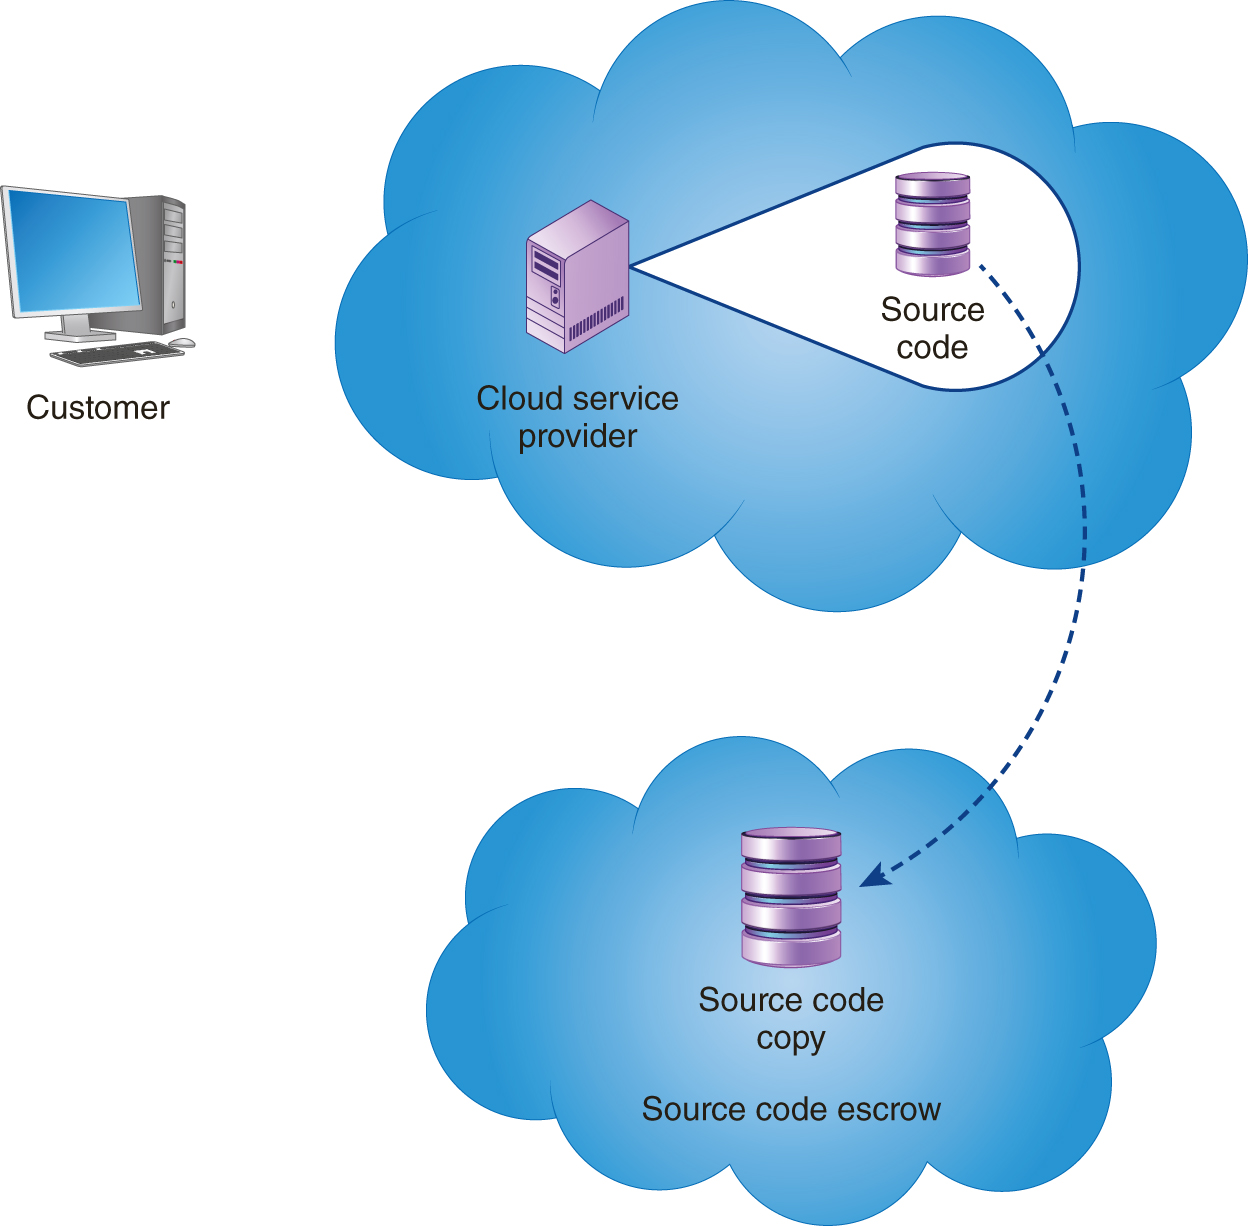 A customer is outside the cloud. In a cloud, a server representing cloud service provider consists of source code. Copy of the same source code is found in another cloud representing source code escrow.